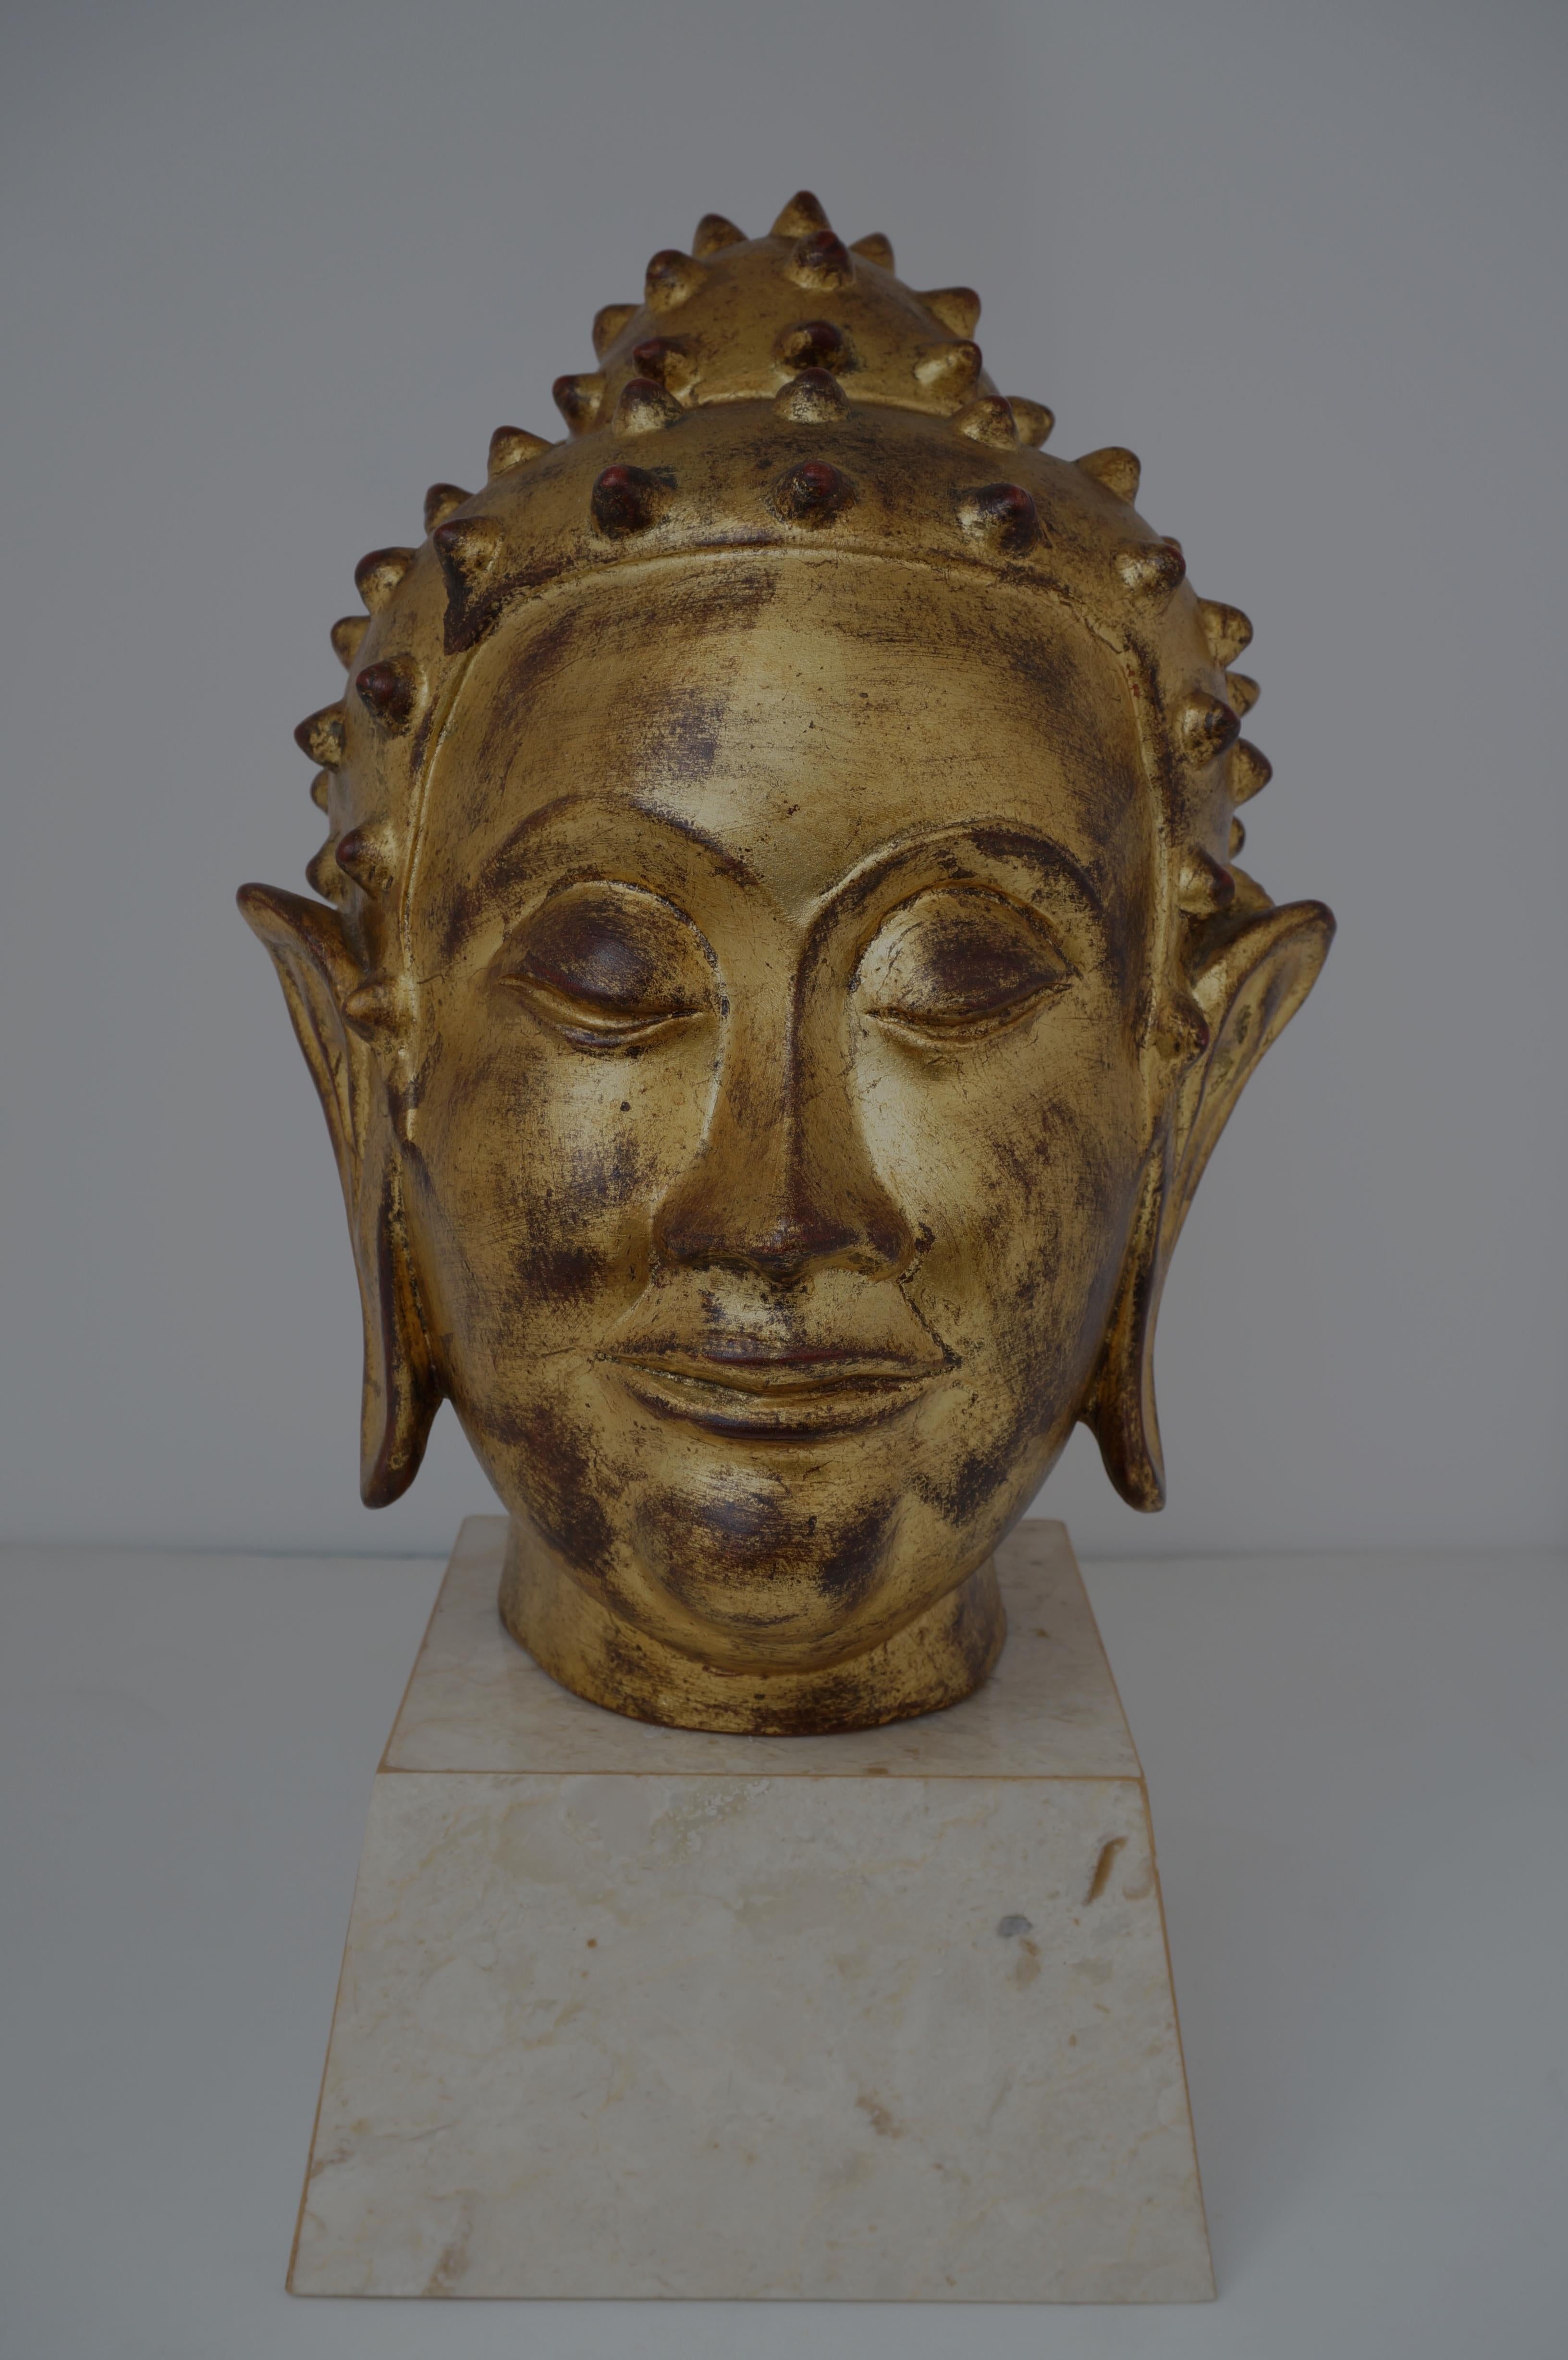 This Italian goldleafed terracotta Buddha head dates to the 1960s-1970s and its serene face will help bring a calmness to your home and life.

Note: Base measures 4.25